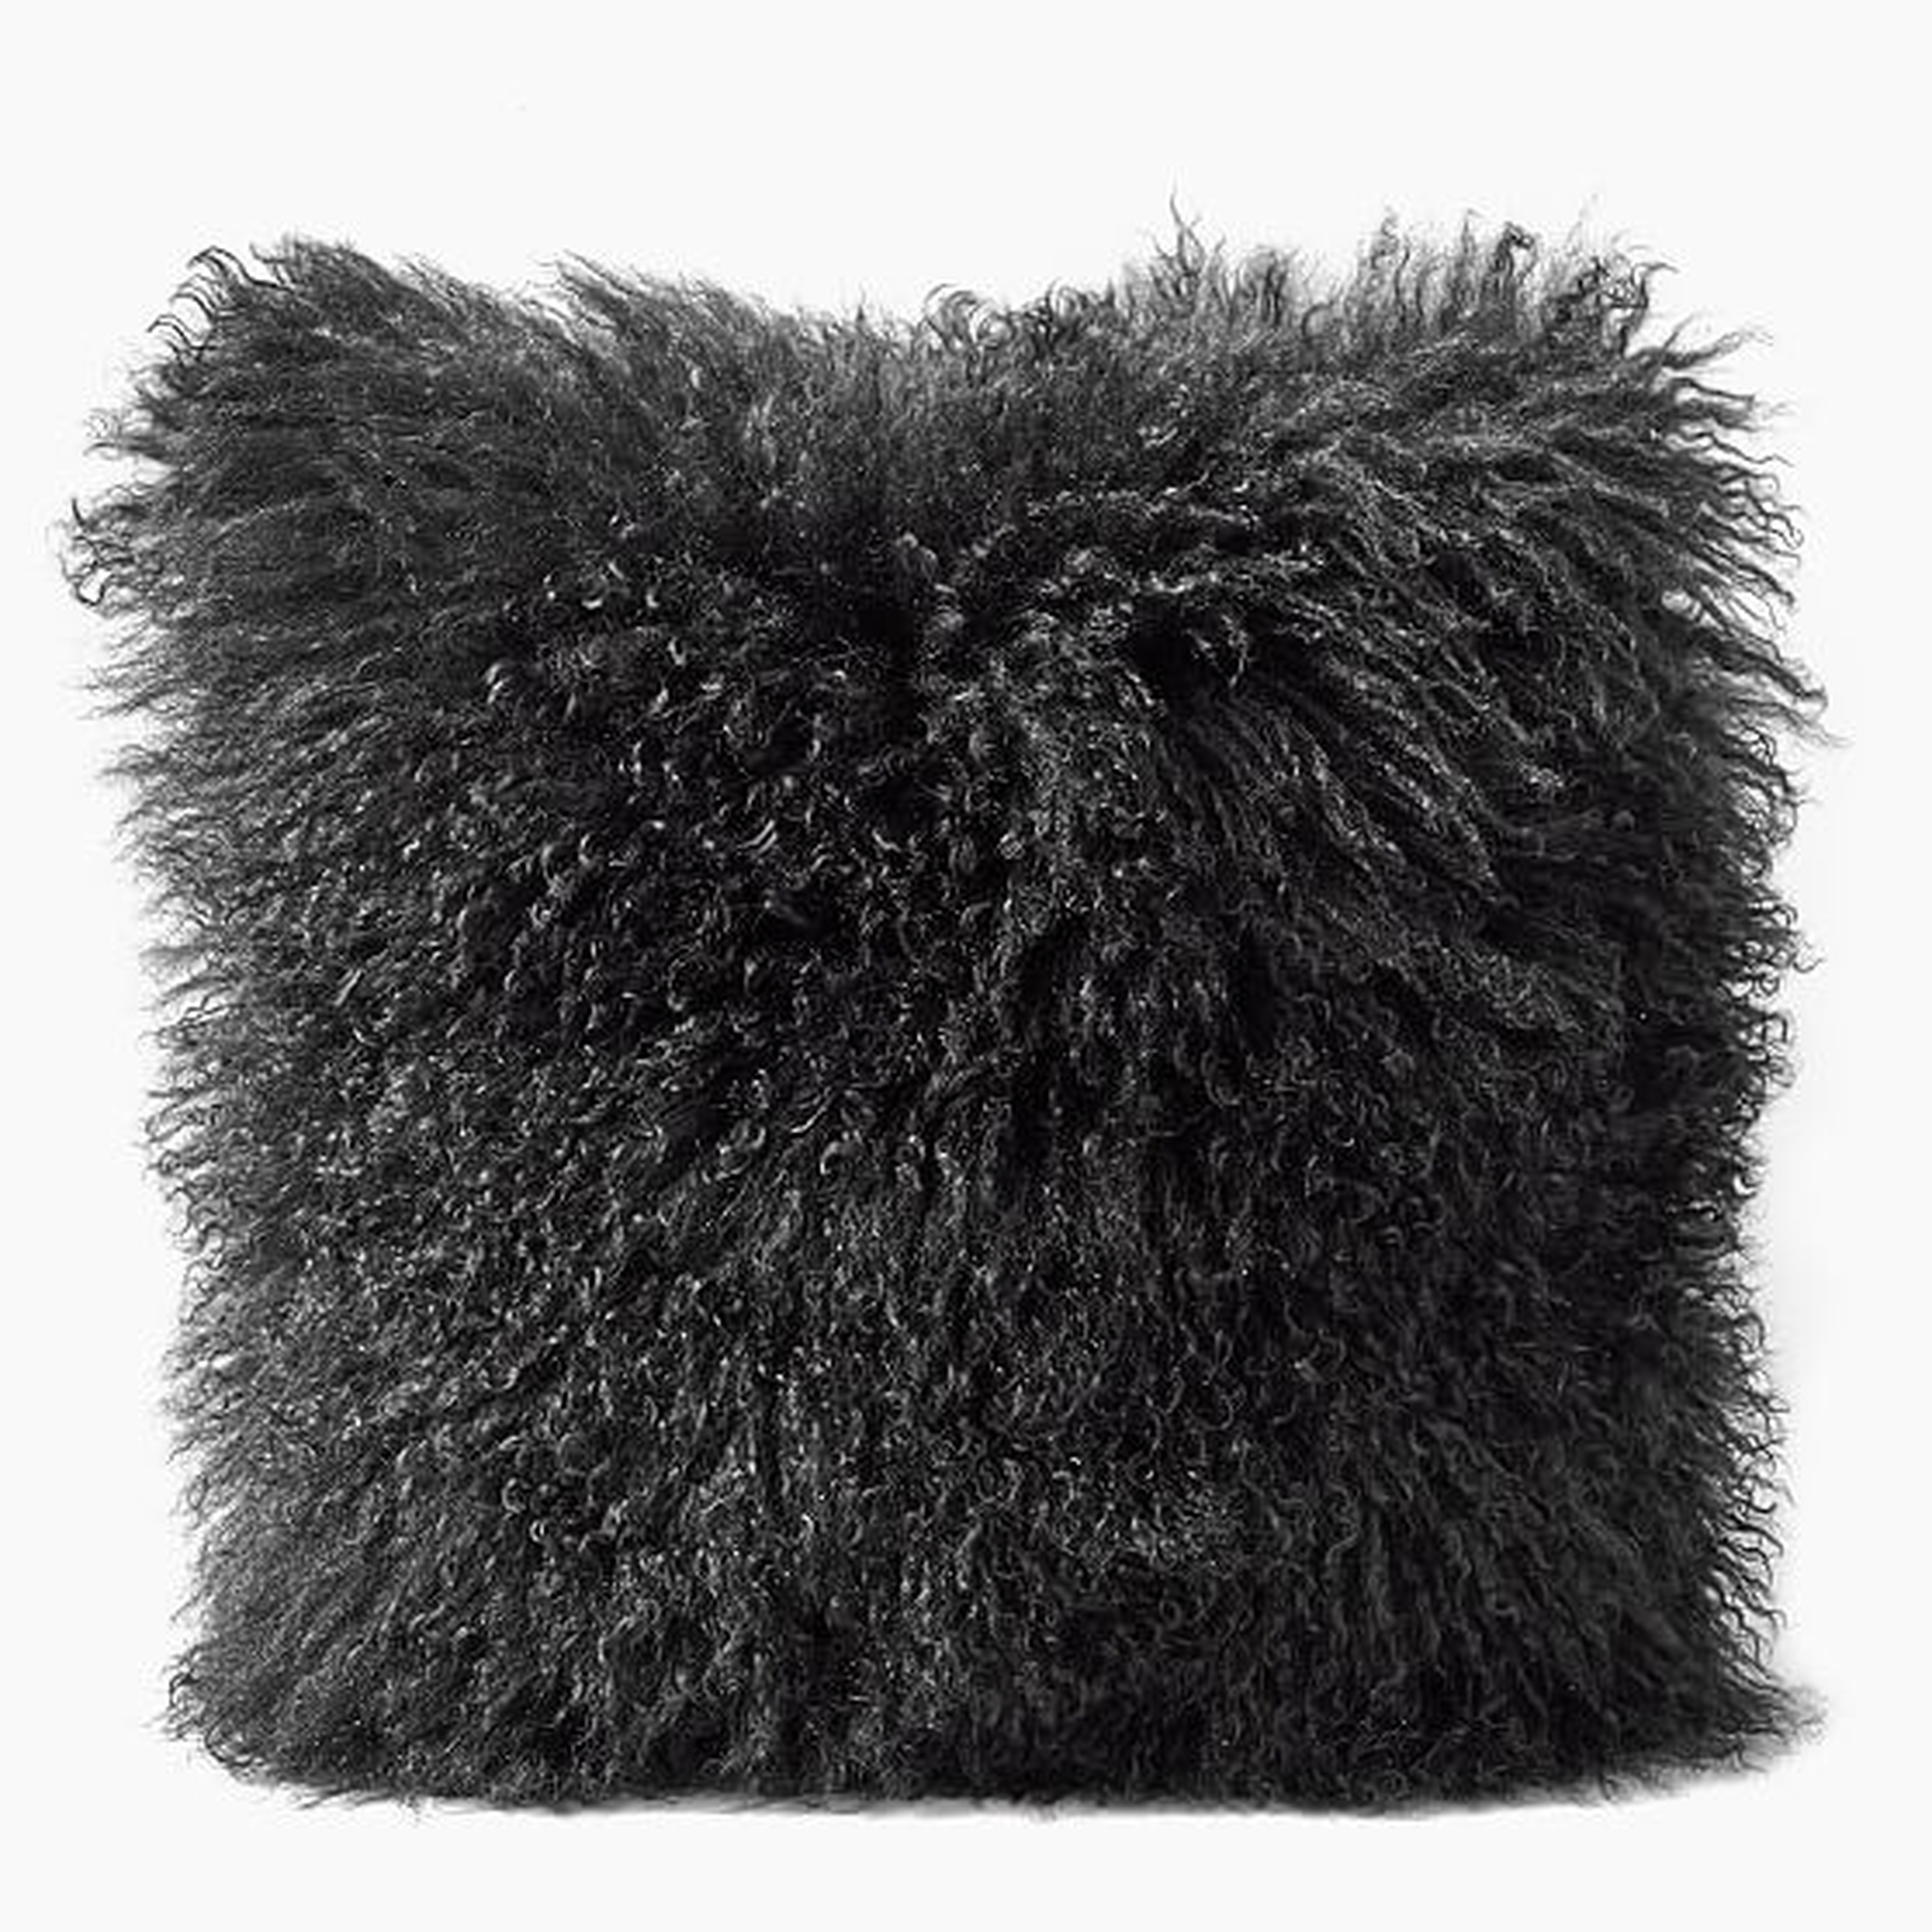 Mongolian Lamb Pillow Cover with Down Insert, Black, 16"x16" - West Elm